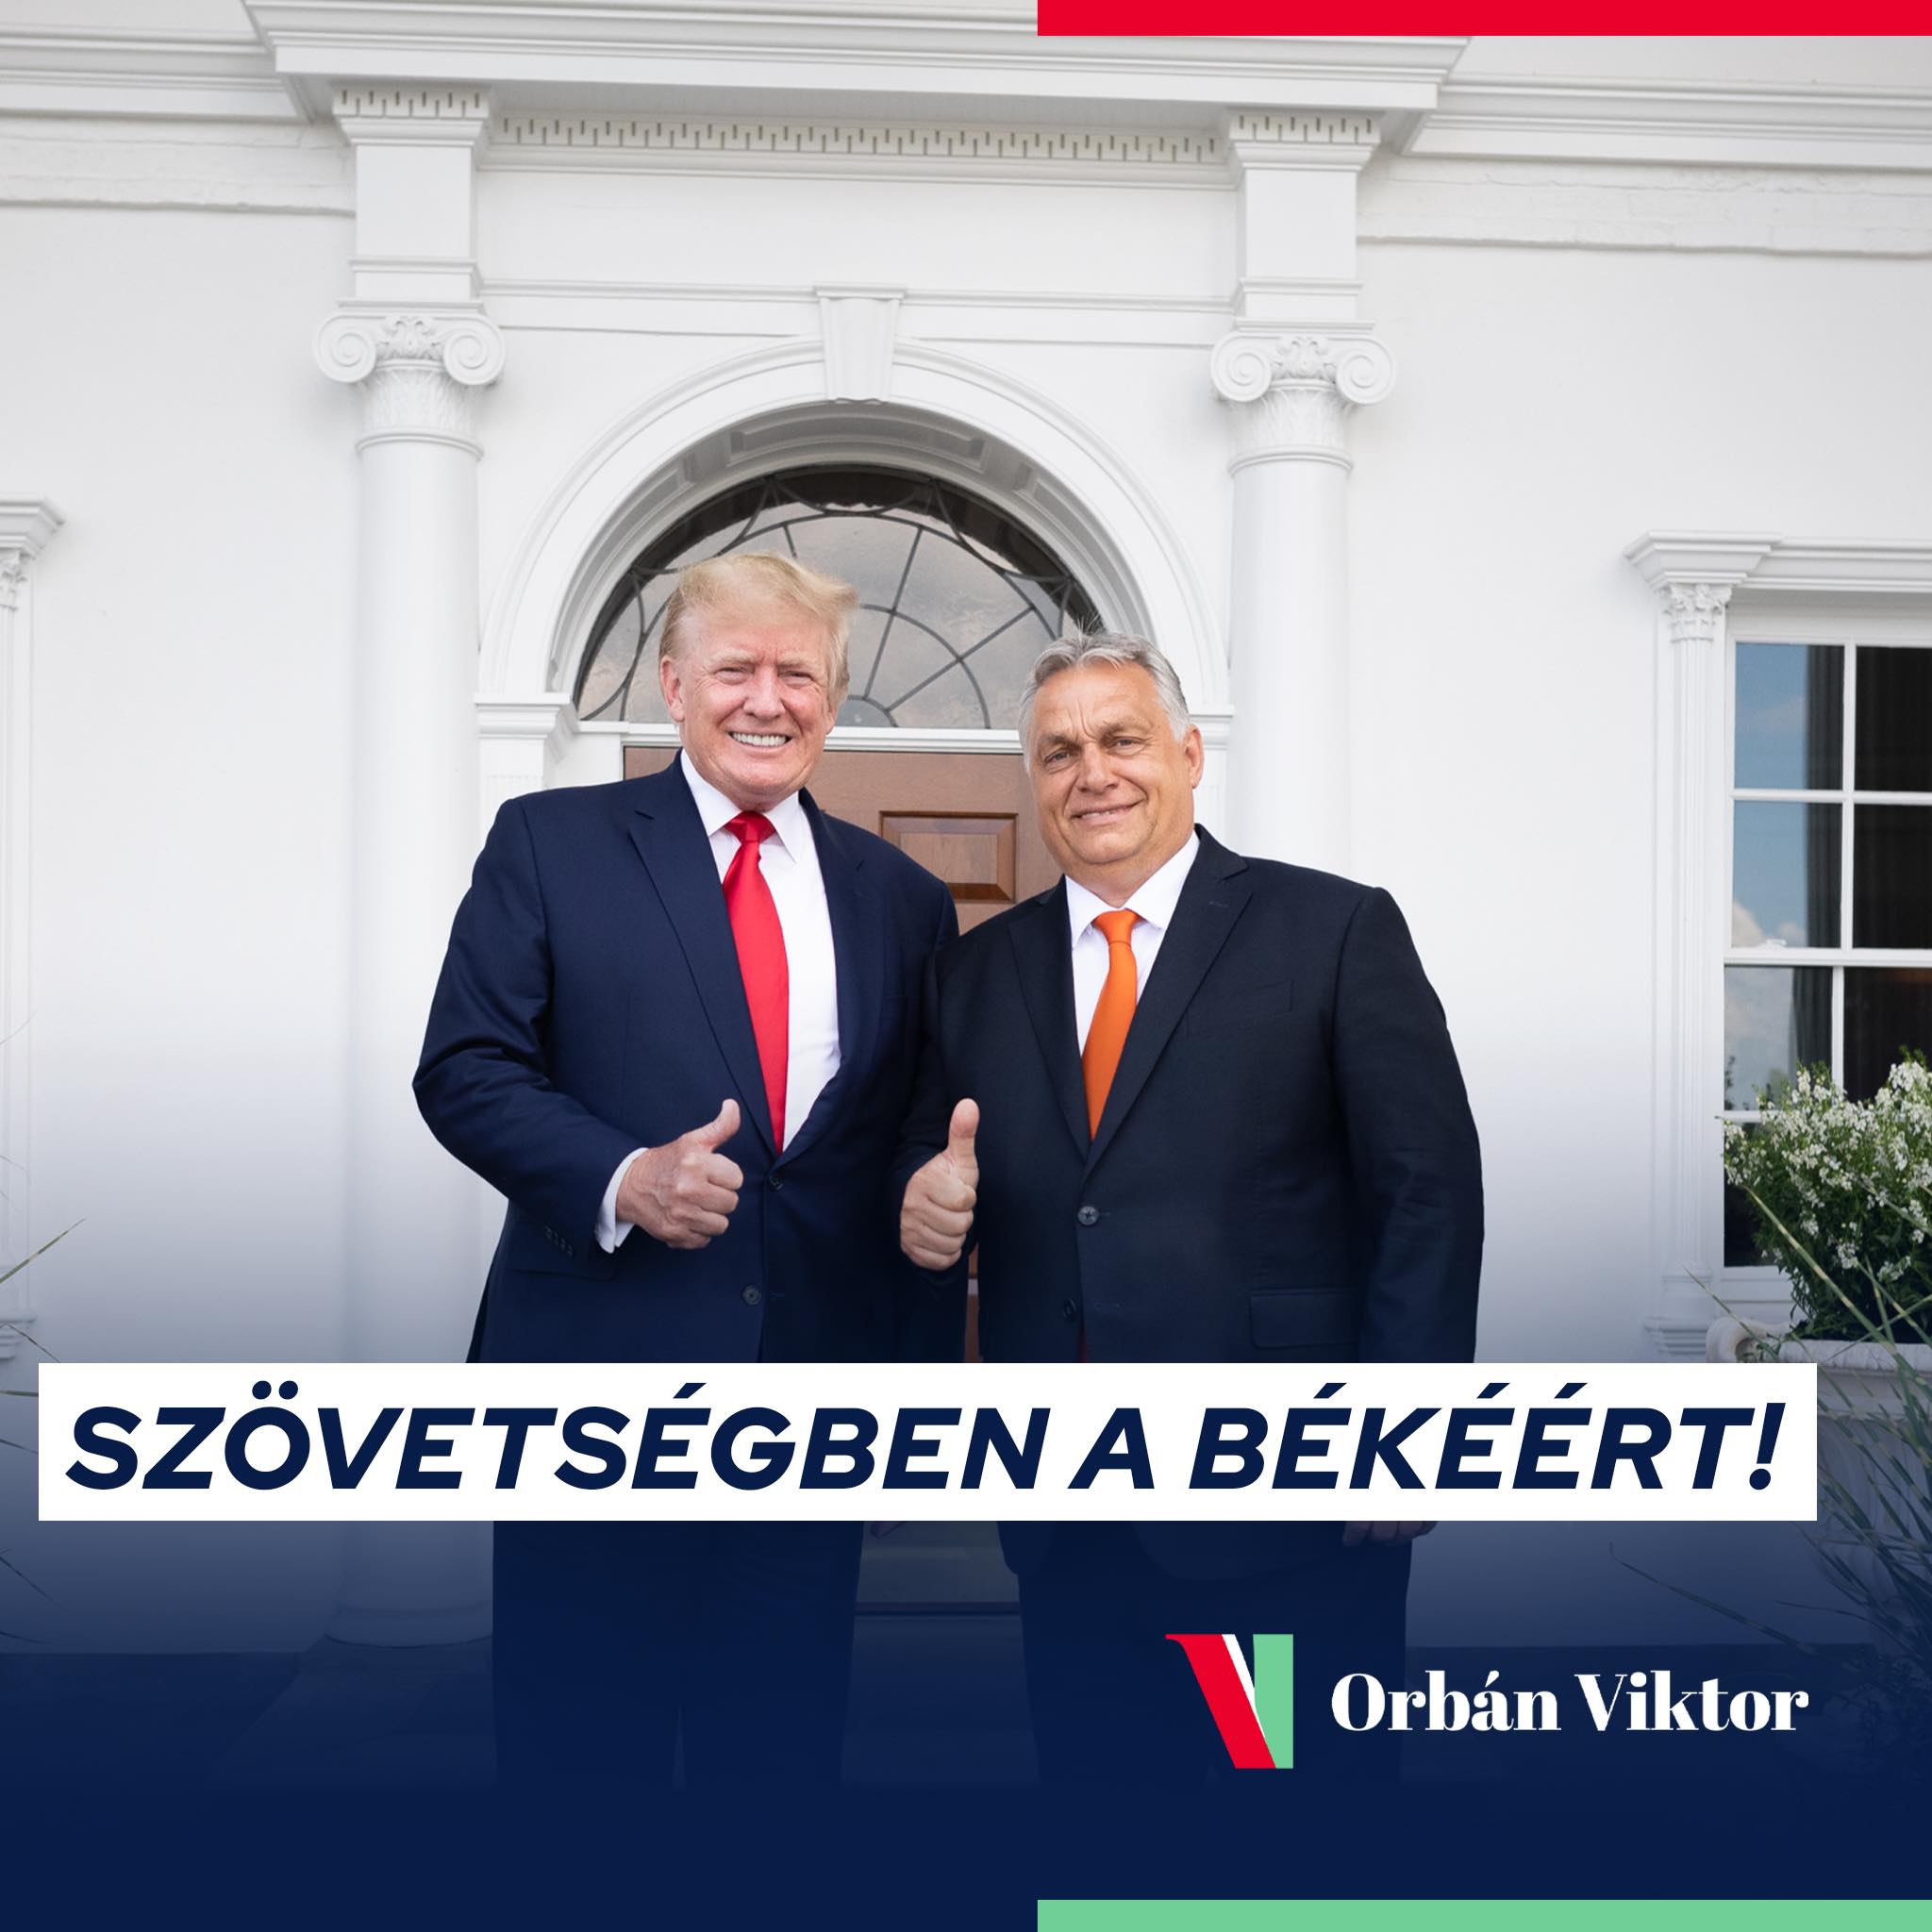 Orbán Meets Trump at Private Estate in US